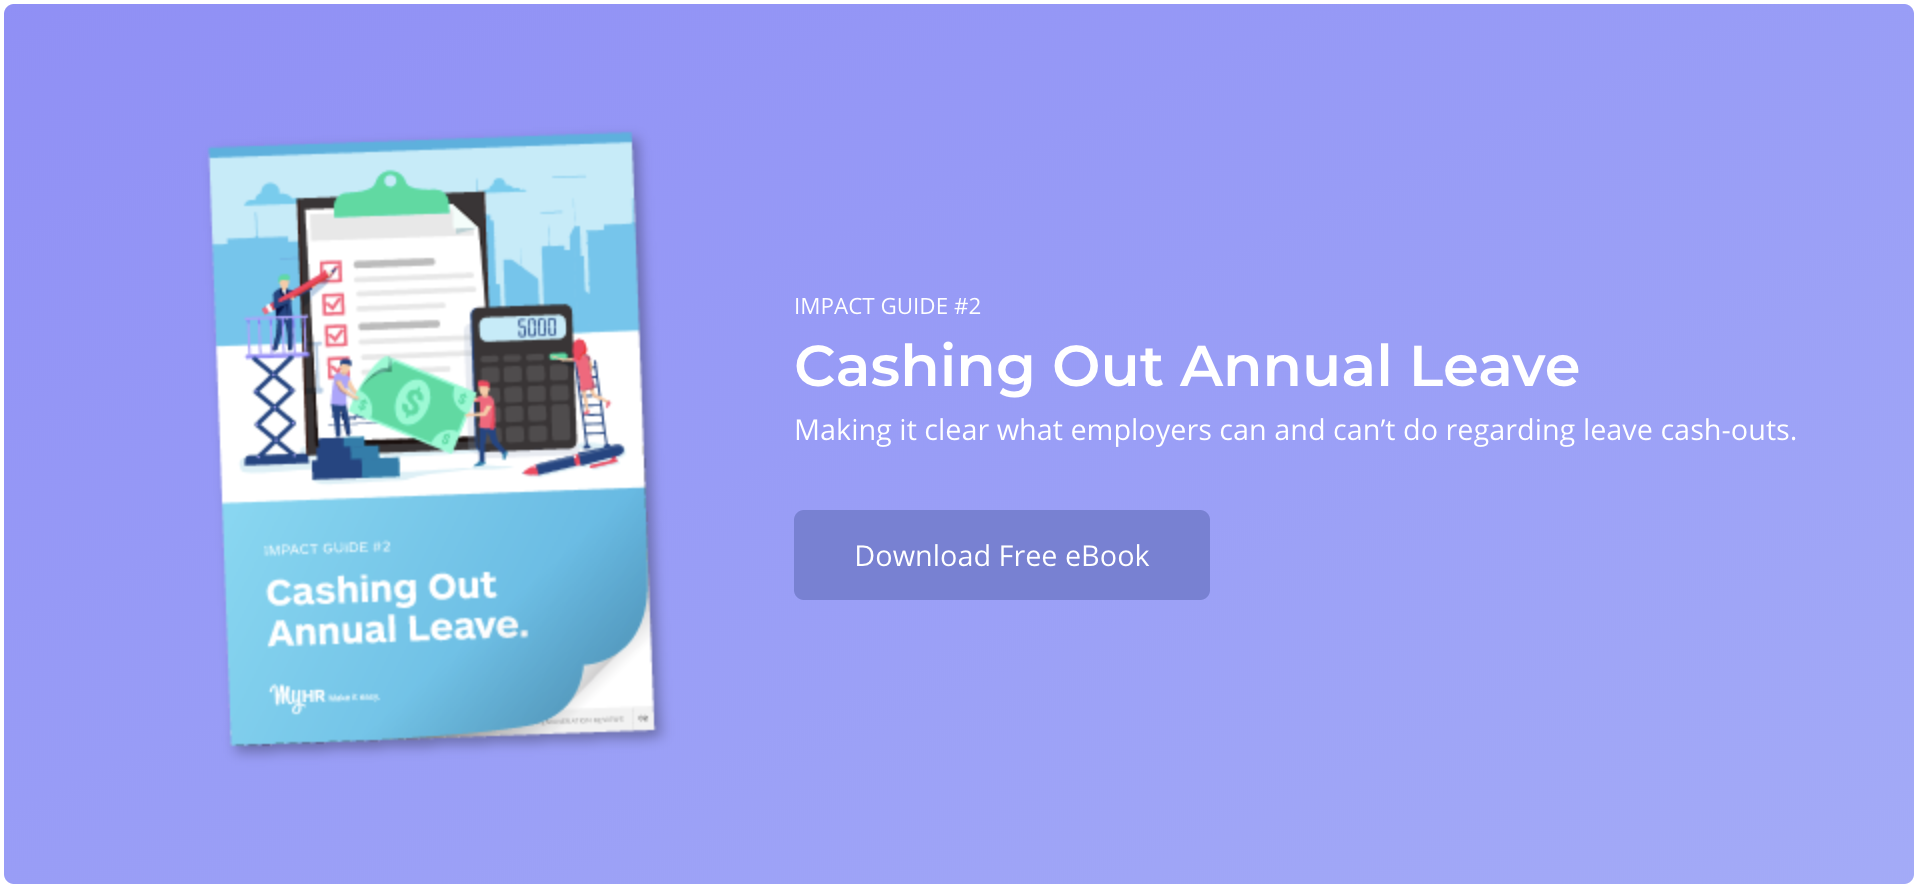 Cashing Out Annual Leave | FlexiTime Blog Image